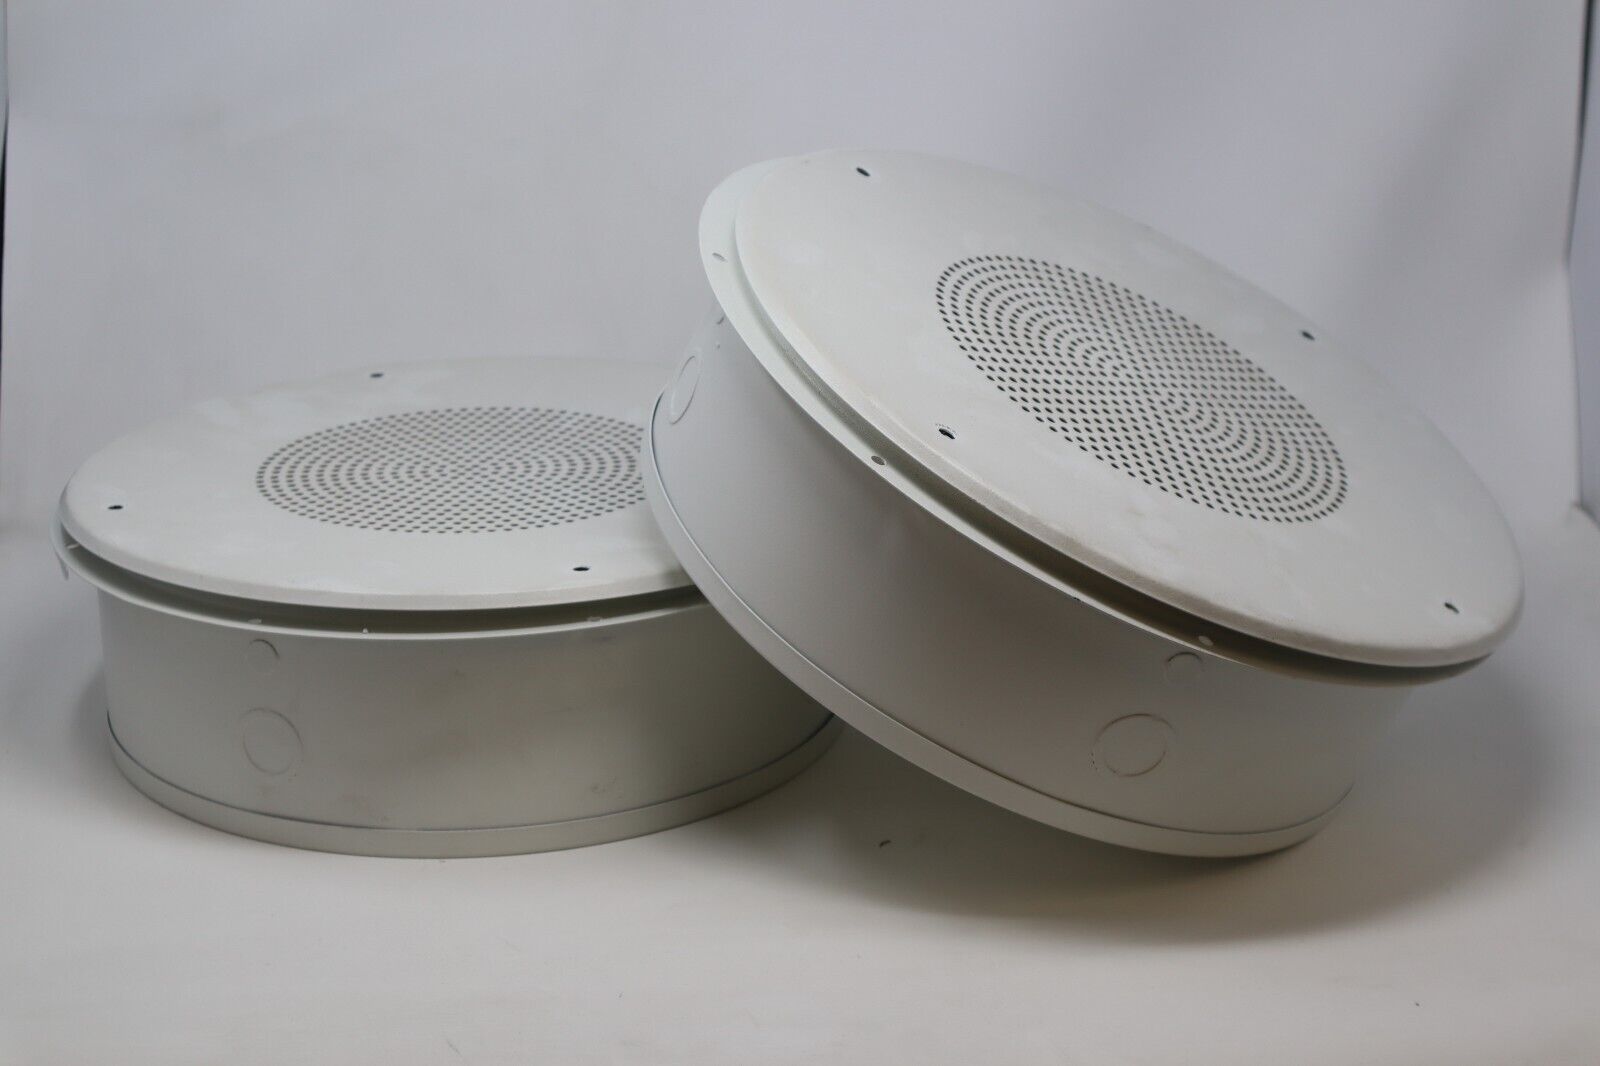 Altec-Lansing Speakers 309-8T x2 with Mounting Hardware | Made in USA